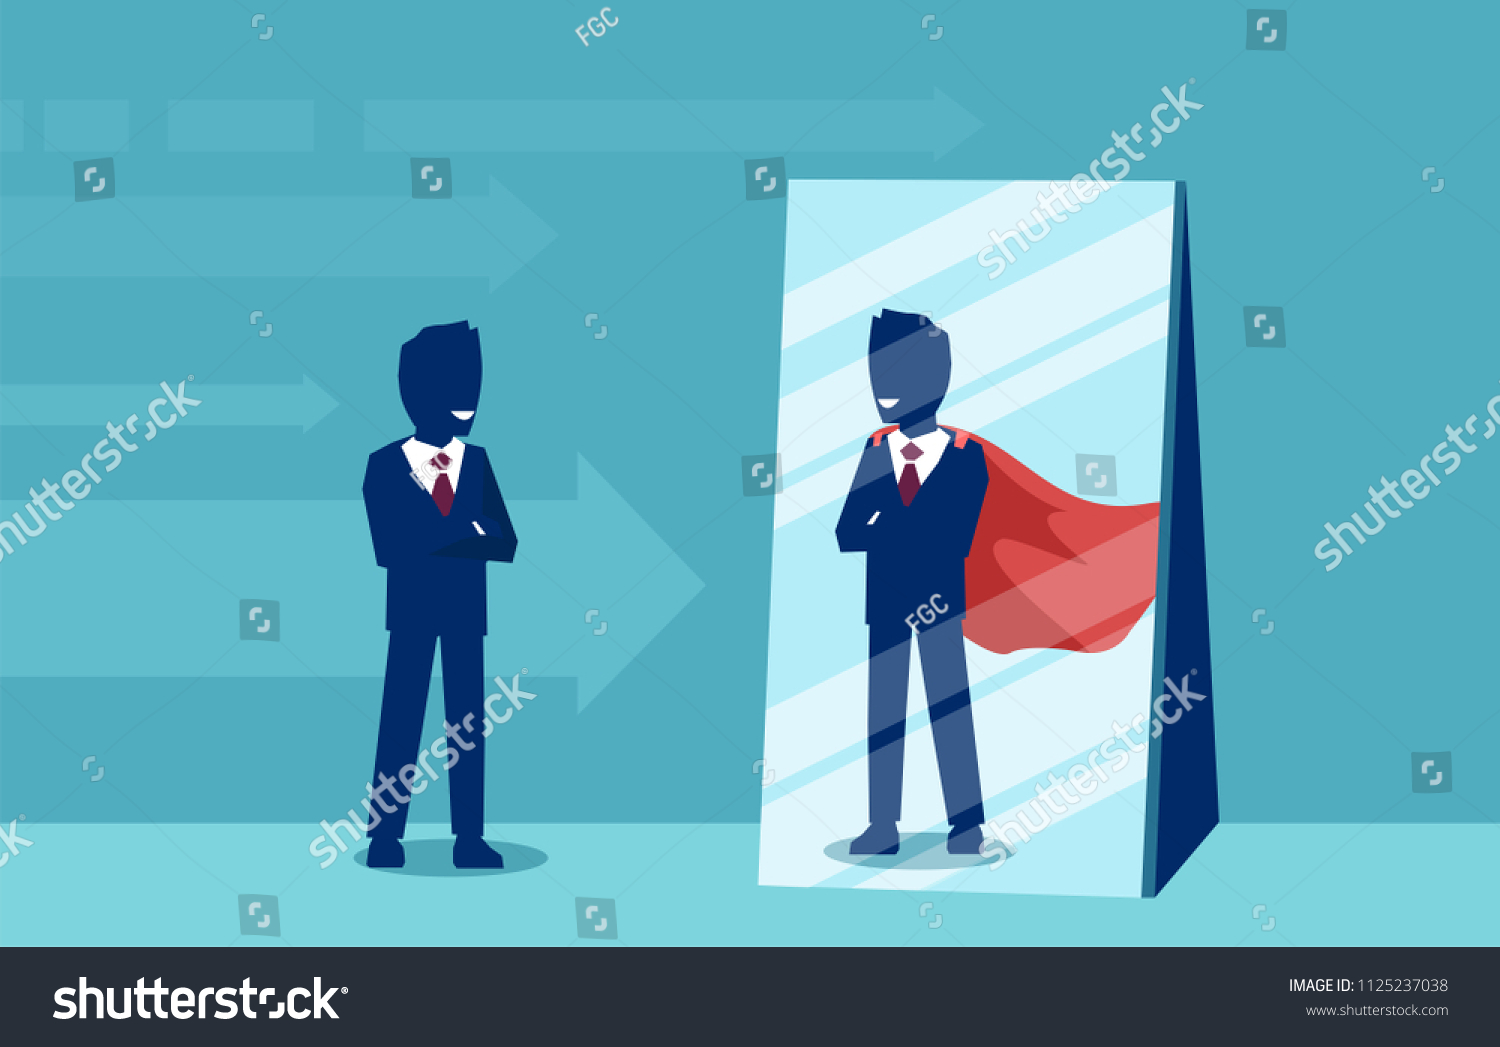 Vector of a motivated business man facing himself as a super hero in the mirror. Self confidence concept #1125237038